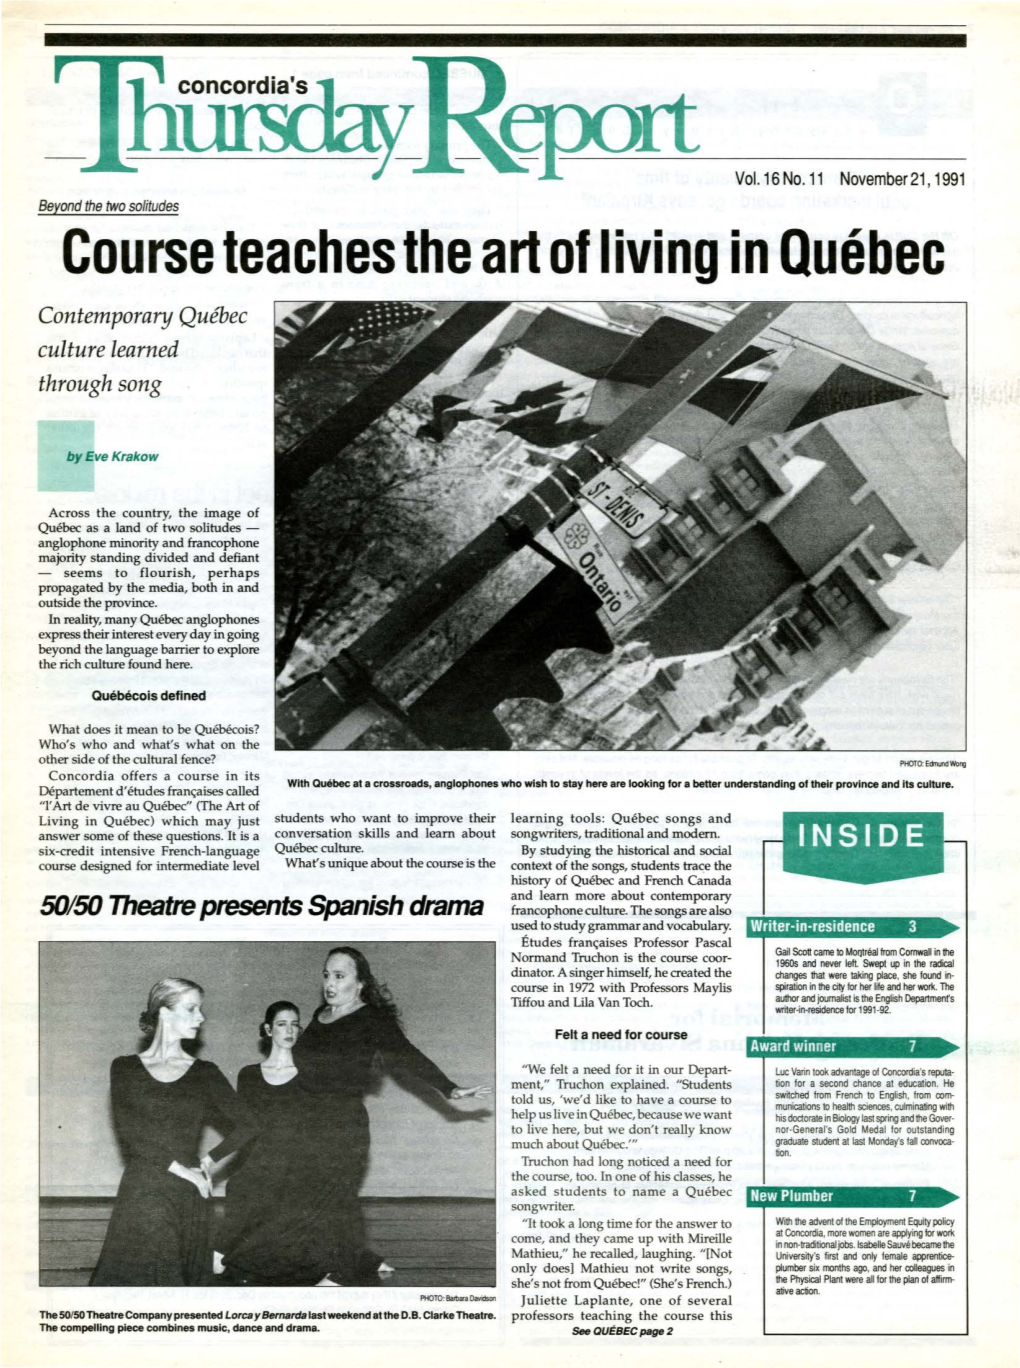 Course Teaches the Art of Living in Quebec Contemporary Quebec Culture Learned Through Song